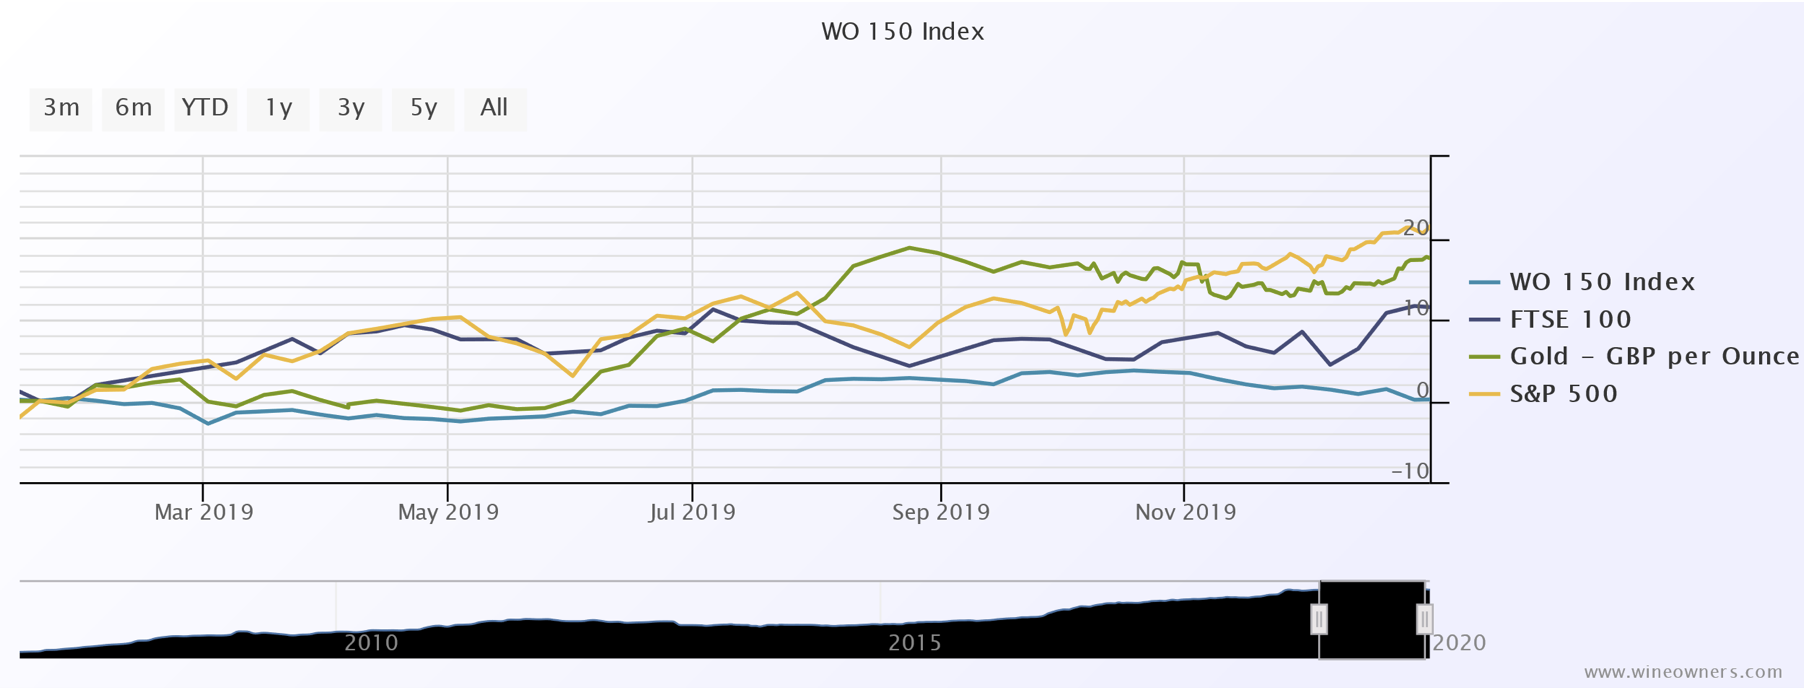 WO 150 Index Wine Owners Investment Report